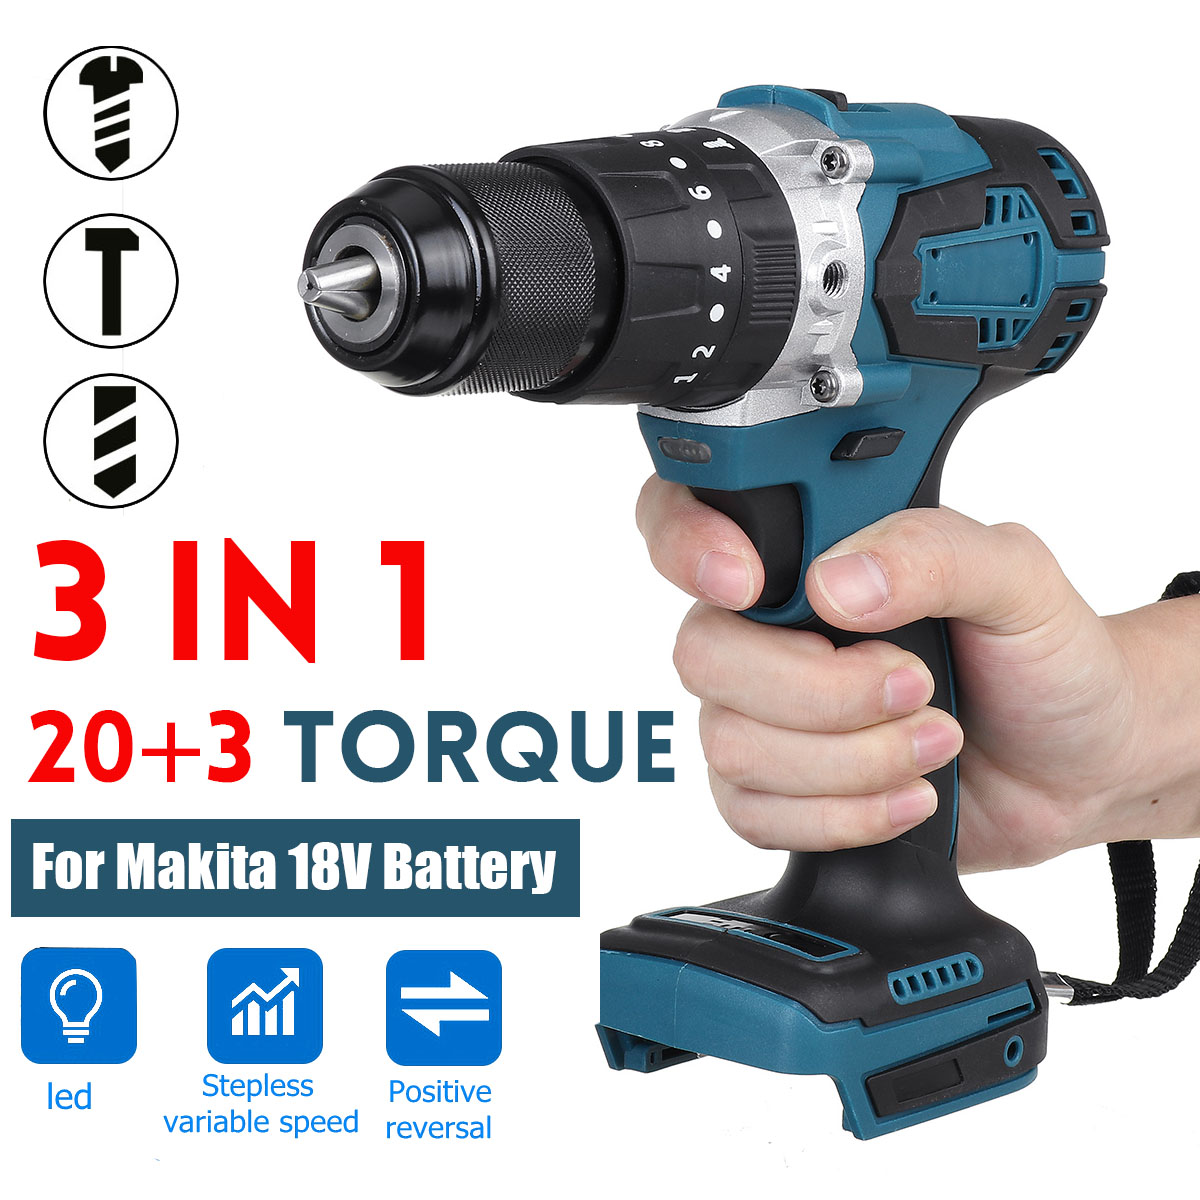 13mm-Chuck-Brushless-Cordless-Electric-Impact-Drill-Hammer-Screwdriver-For-Makita-18V-Battery-1855970-3